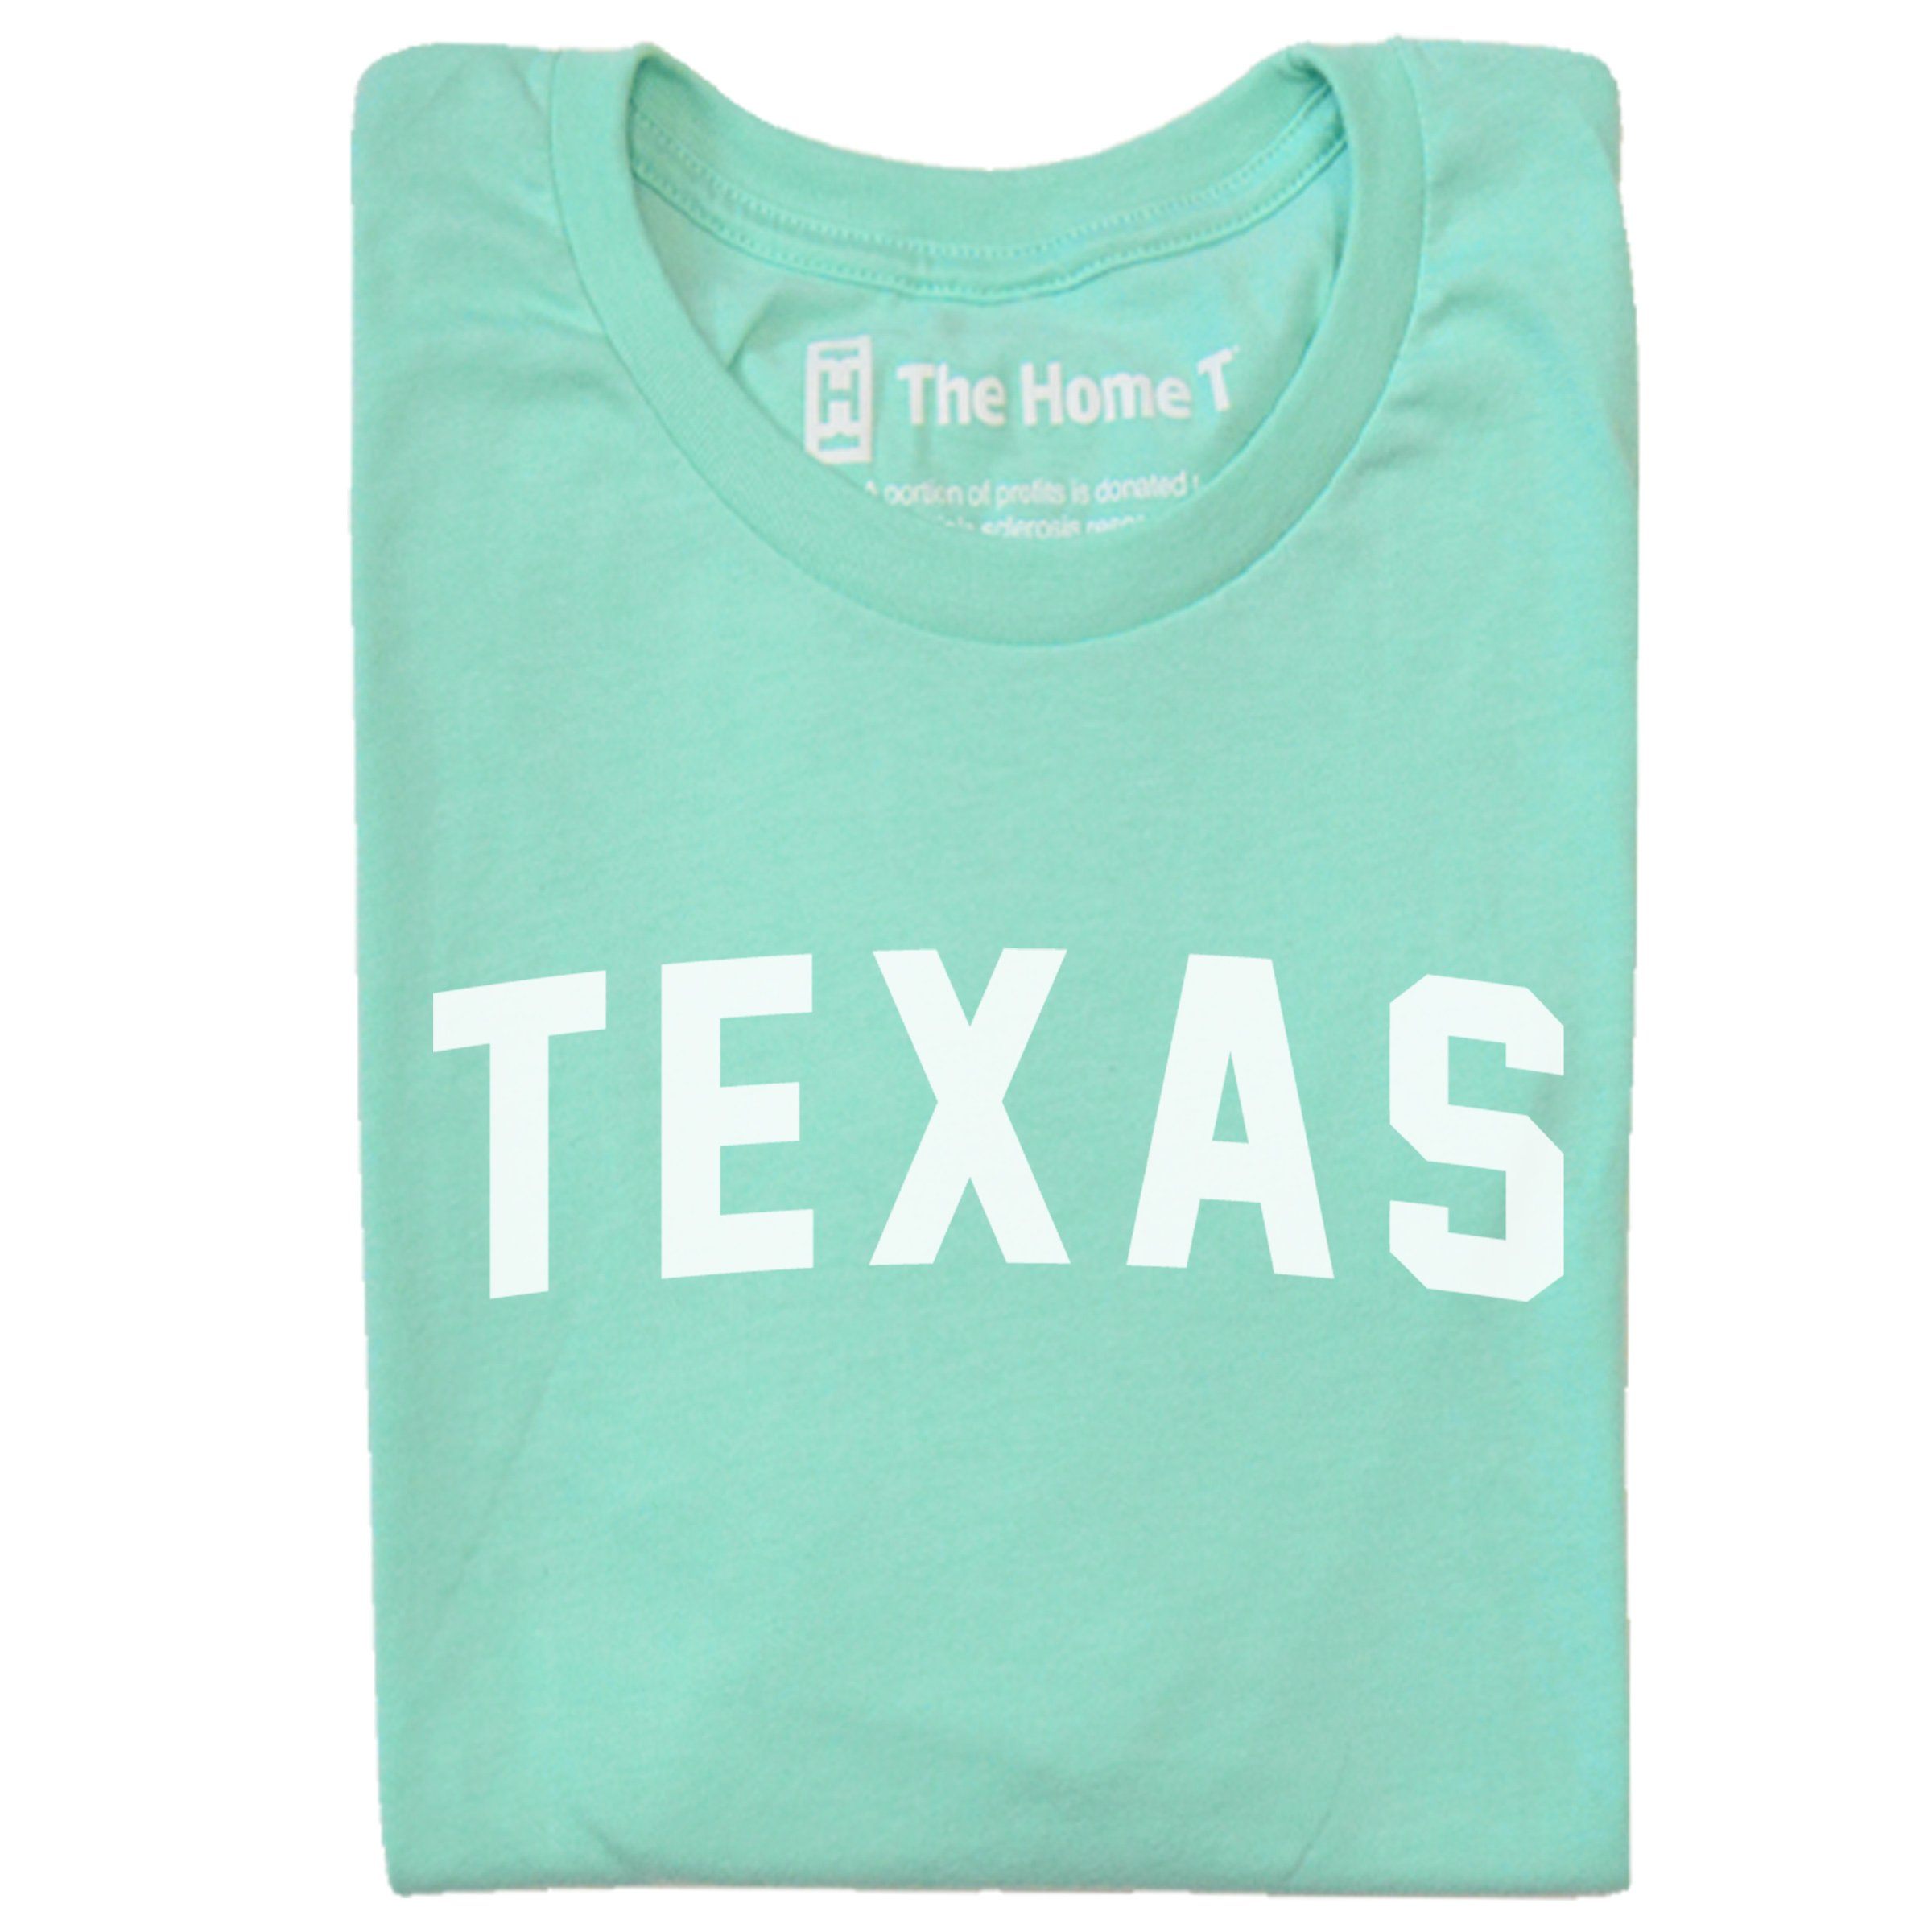 Texas Arched Shirt The Home T XS Mint